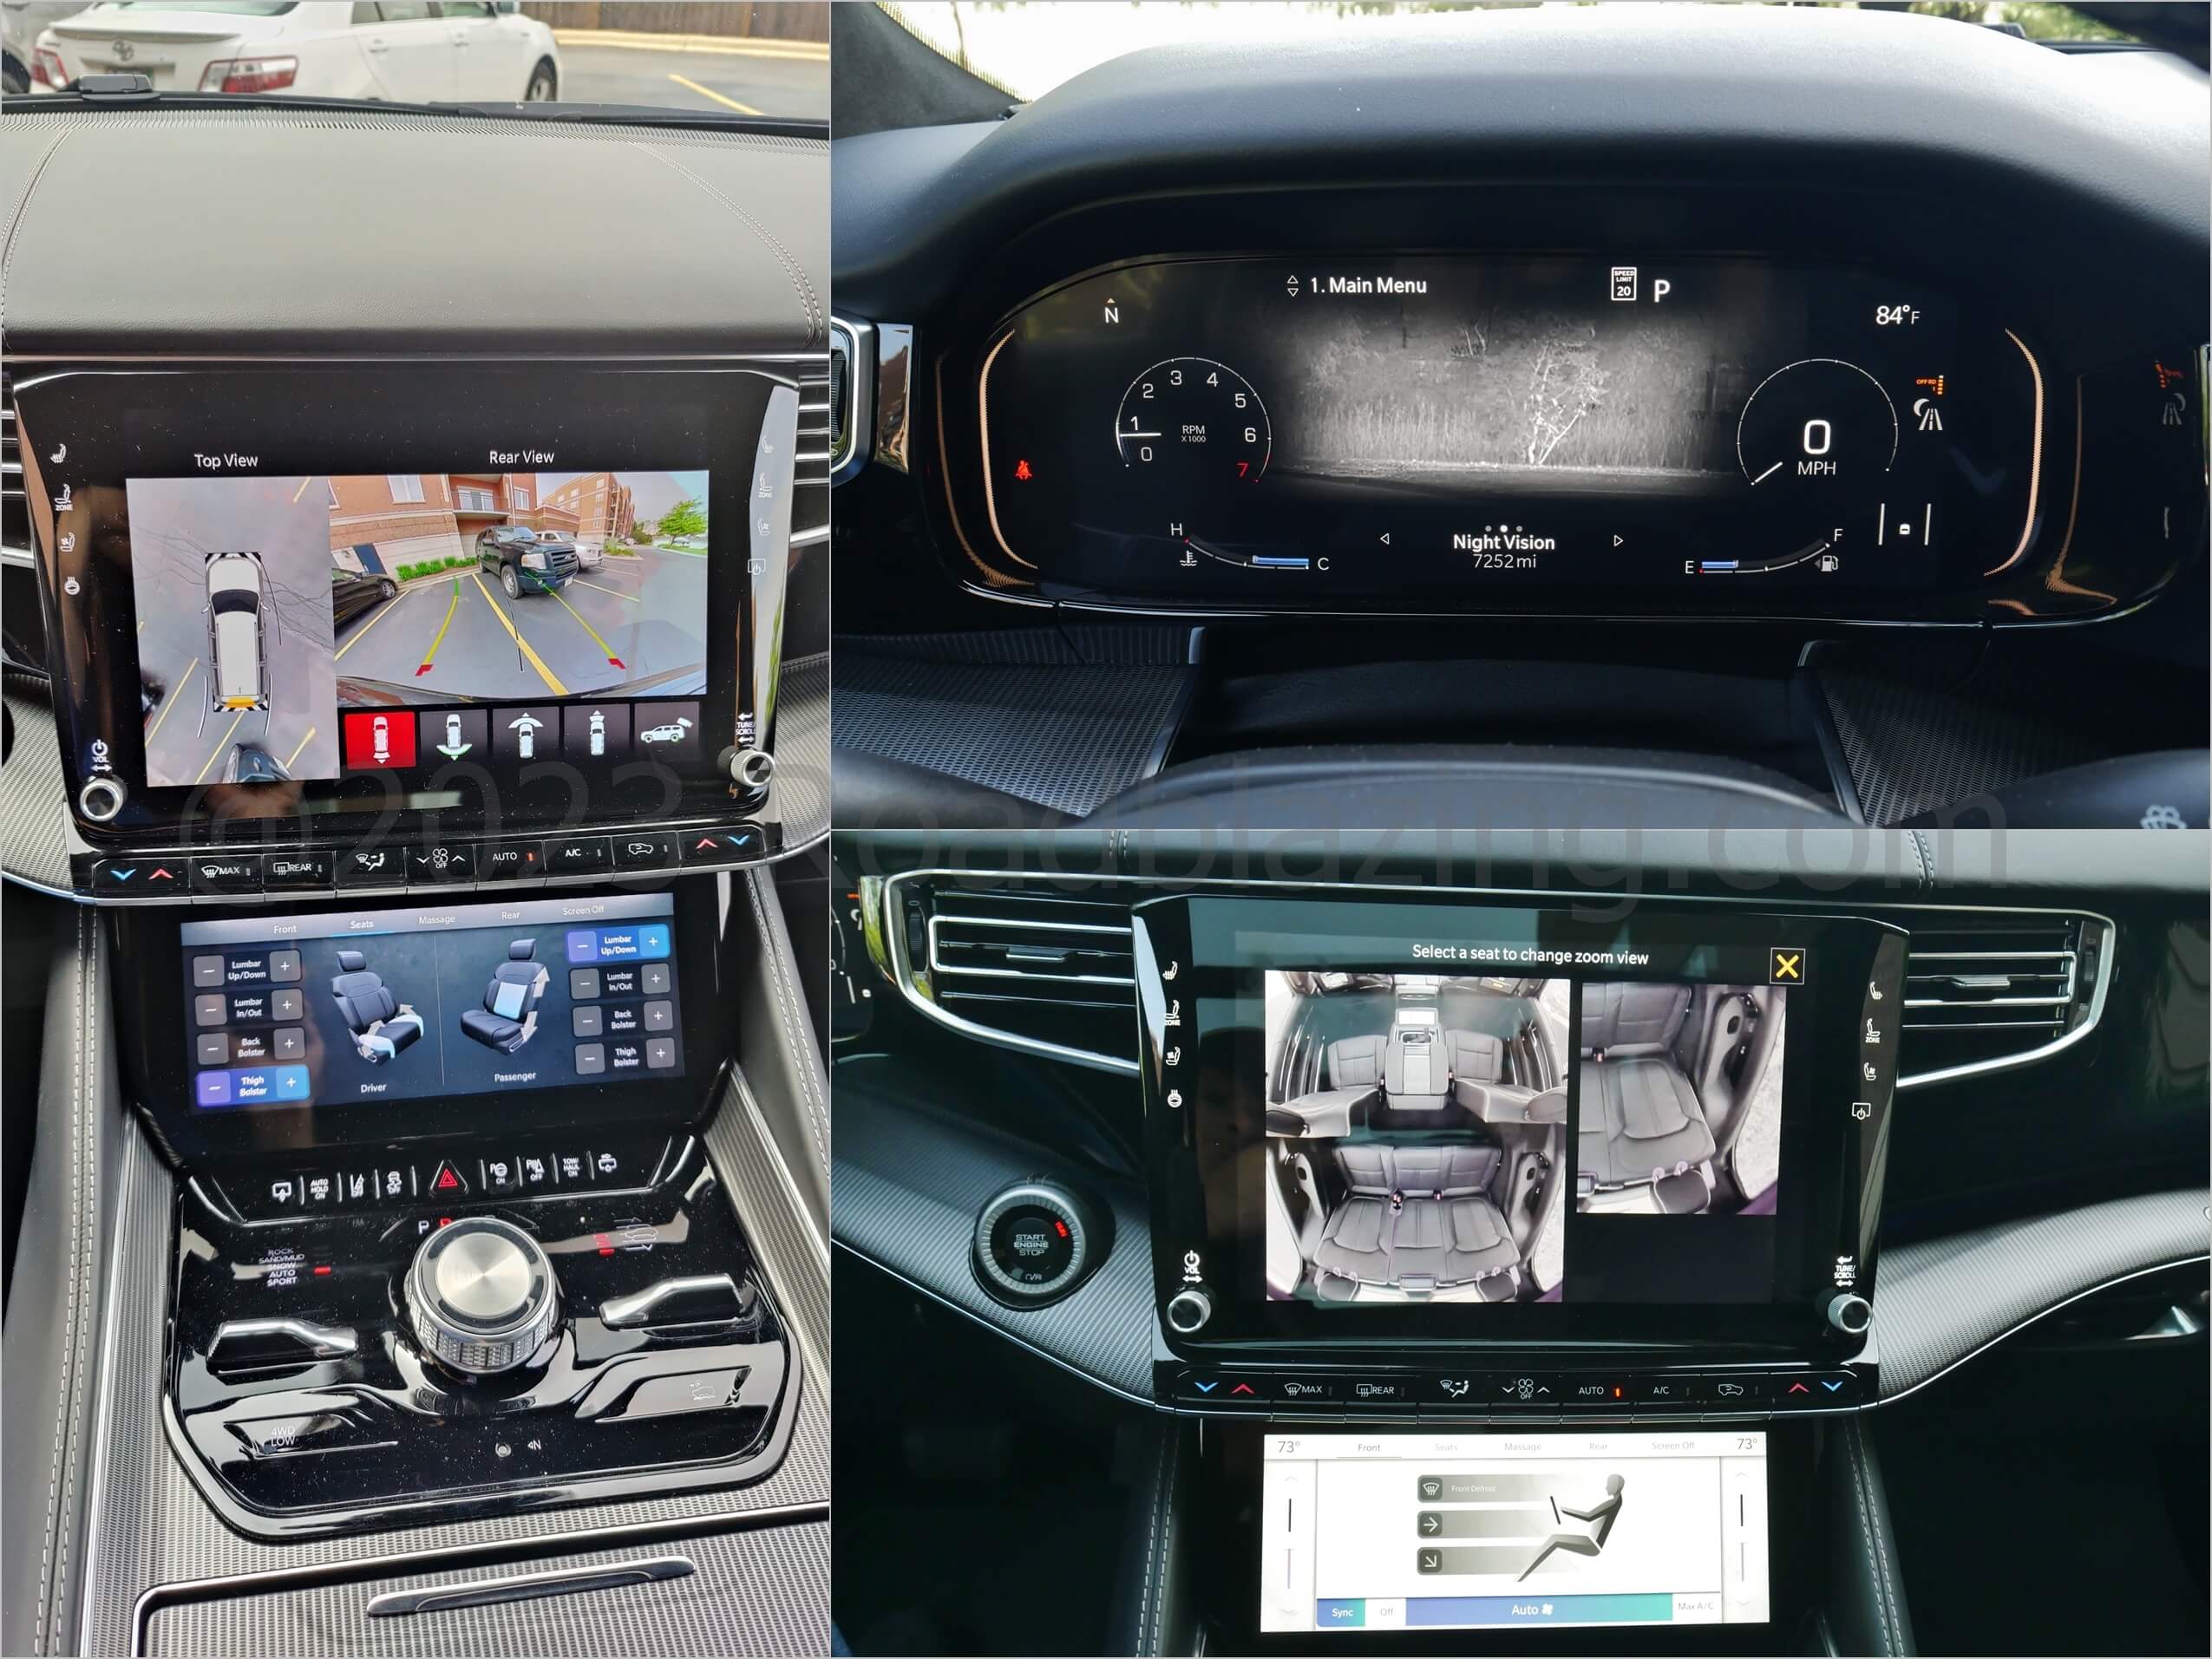 2022 Jeep Grand Wagoneer 6.4L Obsidian 4x4: camera assisted views inside and out